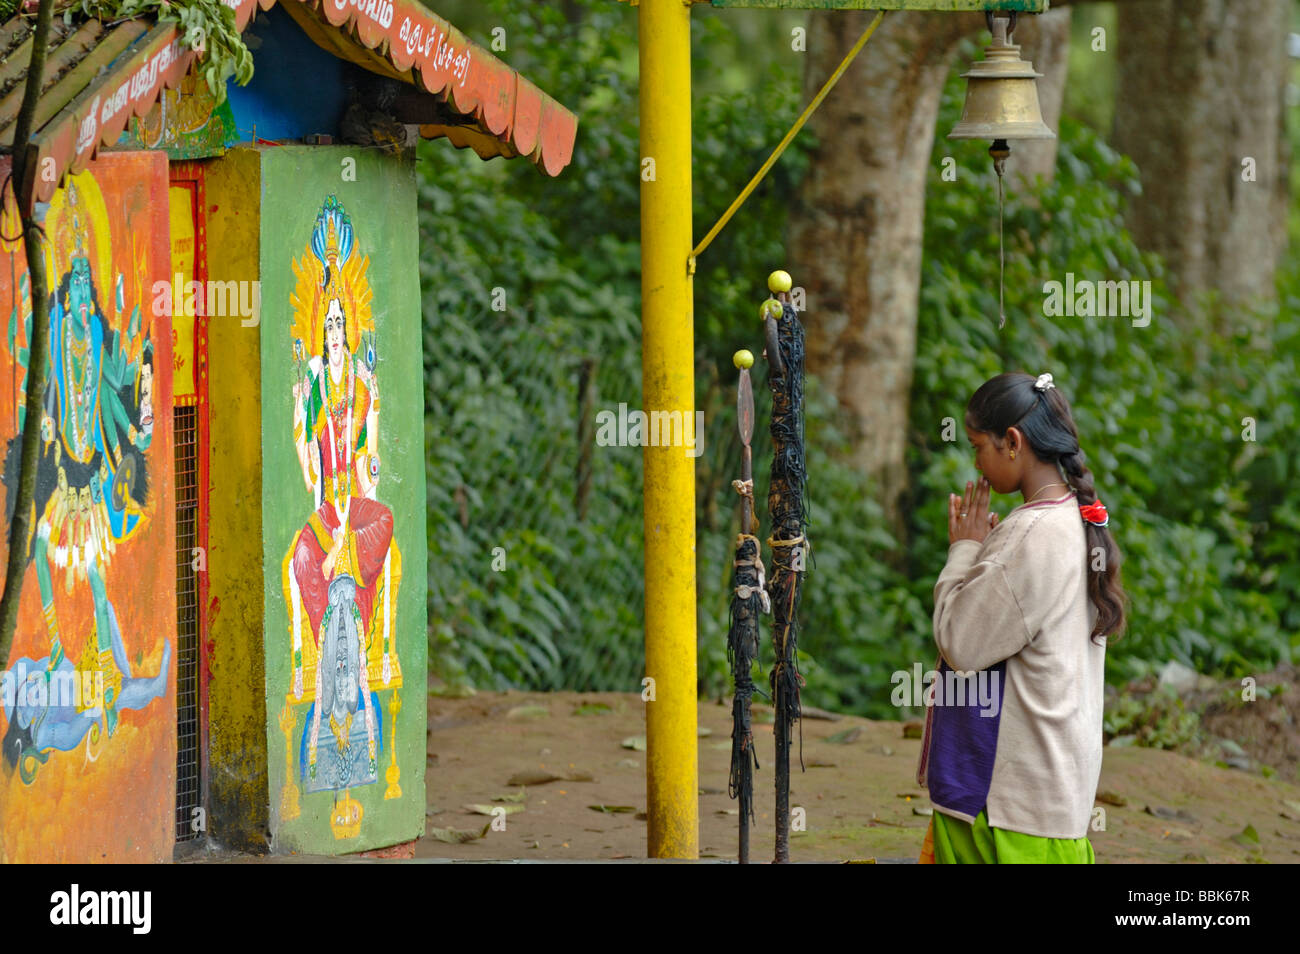 India, Tamil Nadu, Ooty (Udhagamandalam). Indian woman worshipping at a small local shrine in Ooty. No releases available. Stock Photo